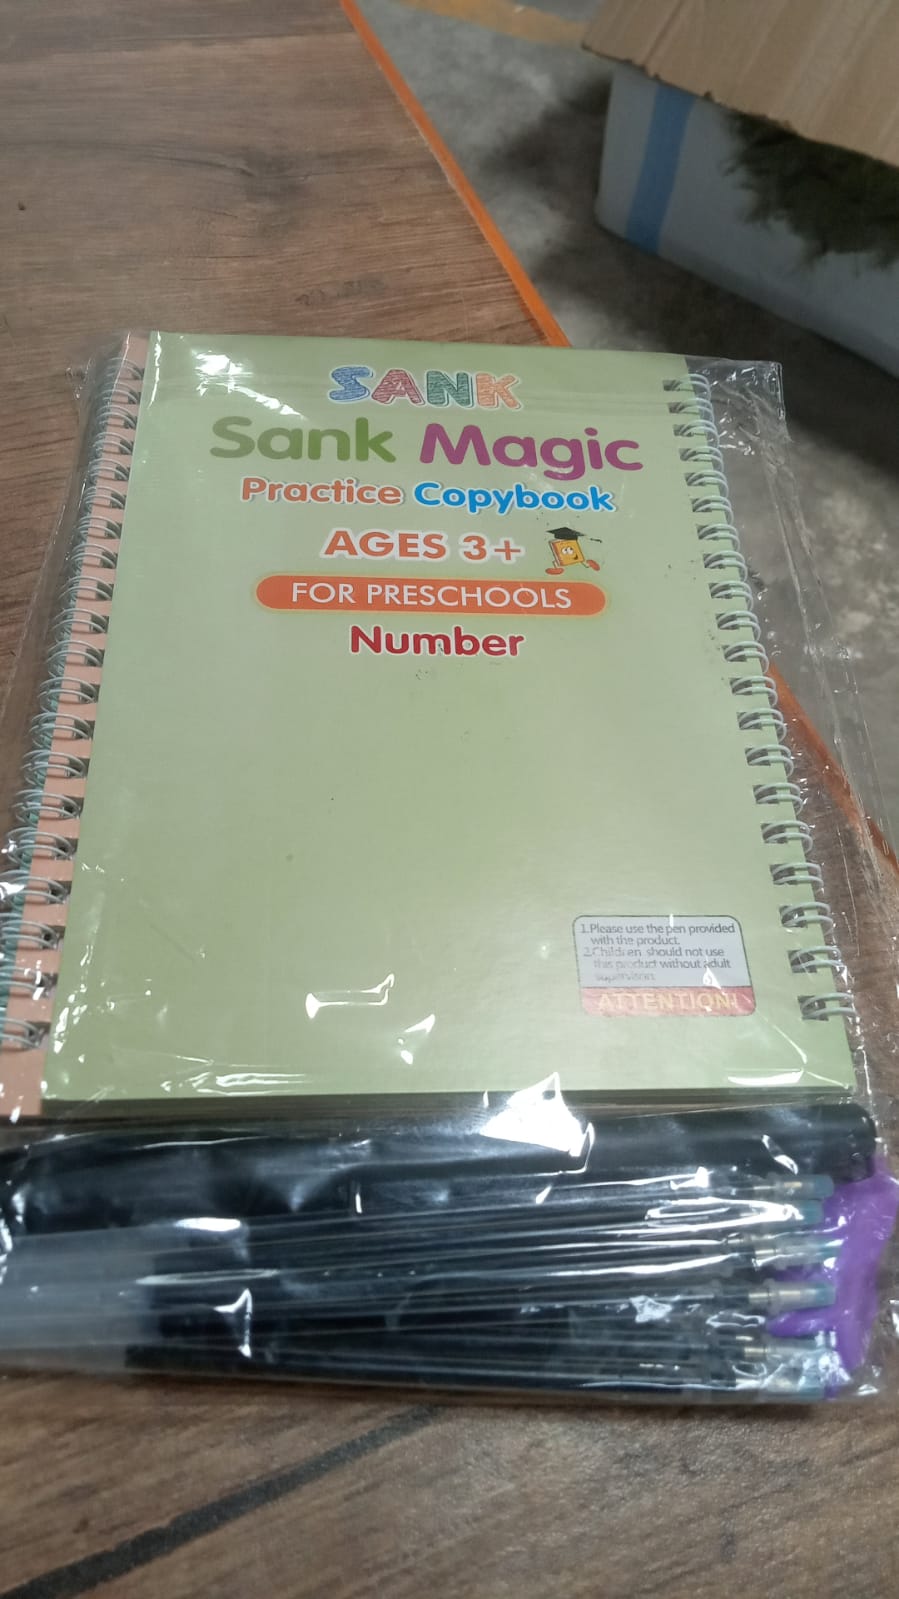 8075 4 Pc Magic Copybook widely used by kids, childrenâ€™s and even adults also to write down important things over it while emergencies etc.